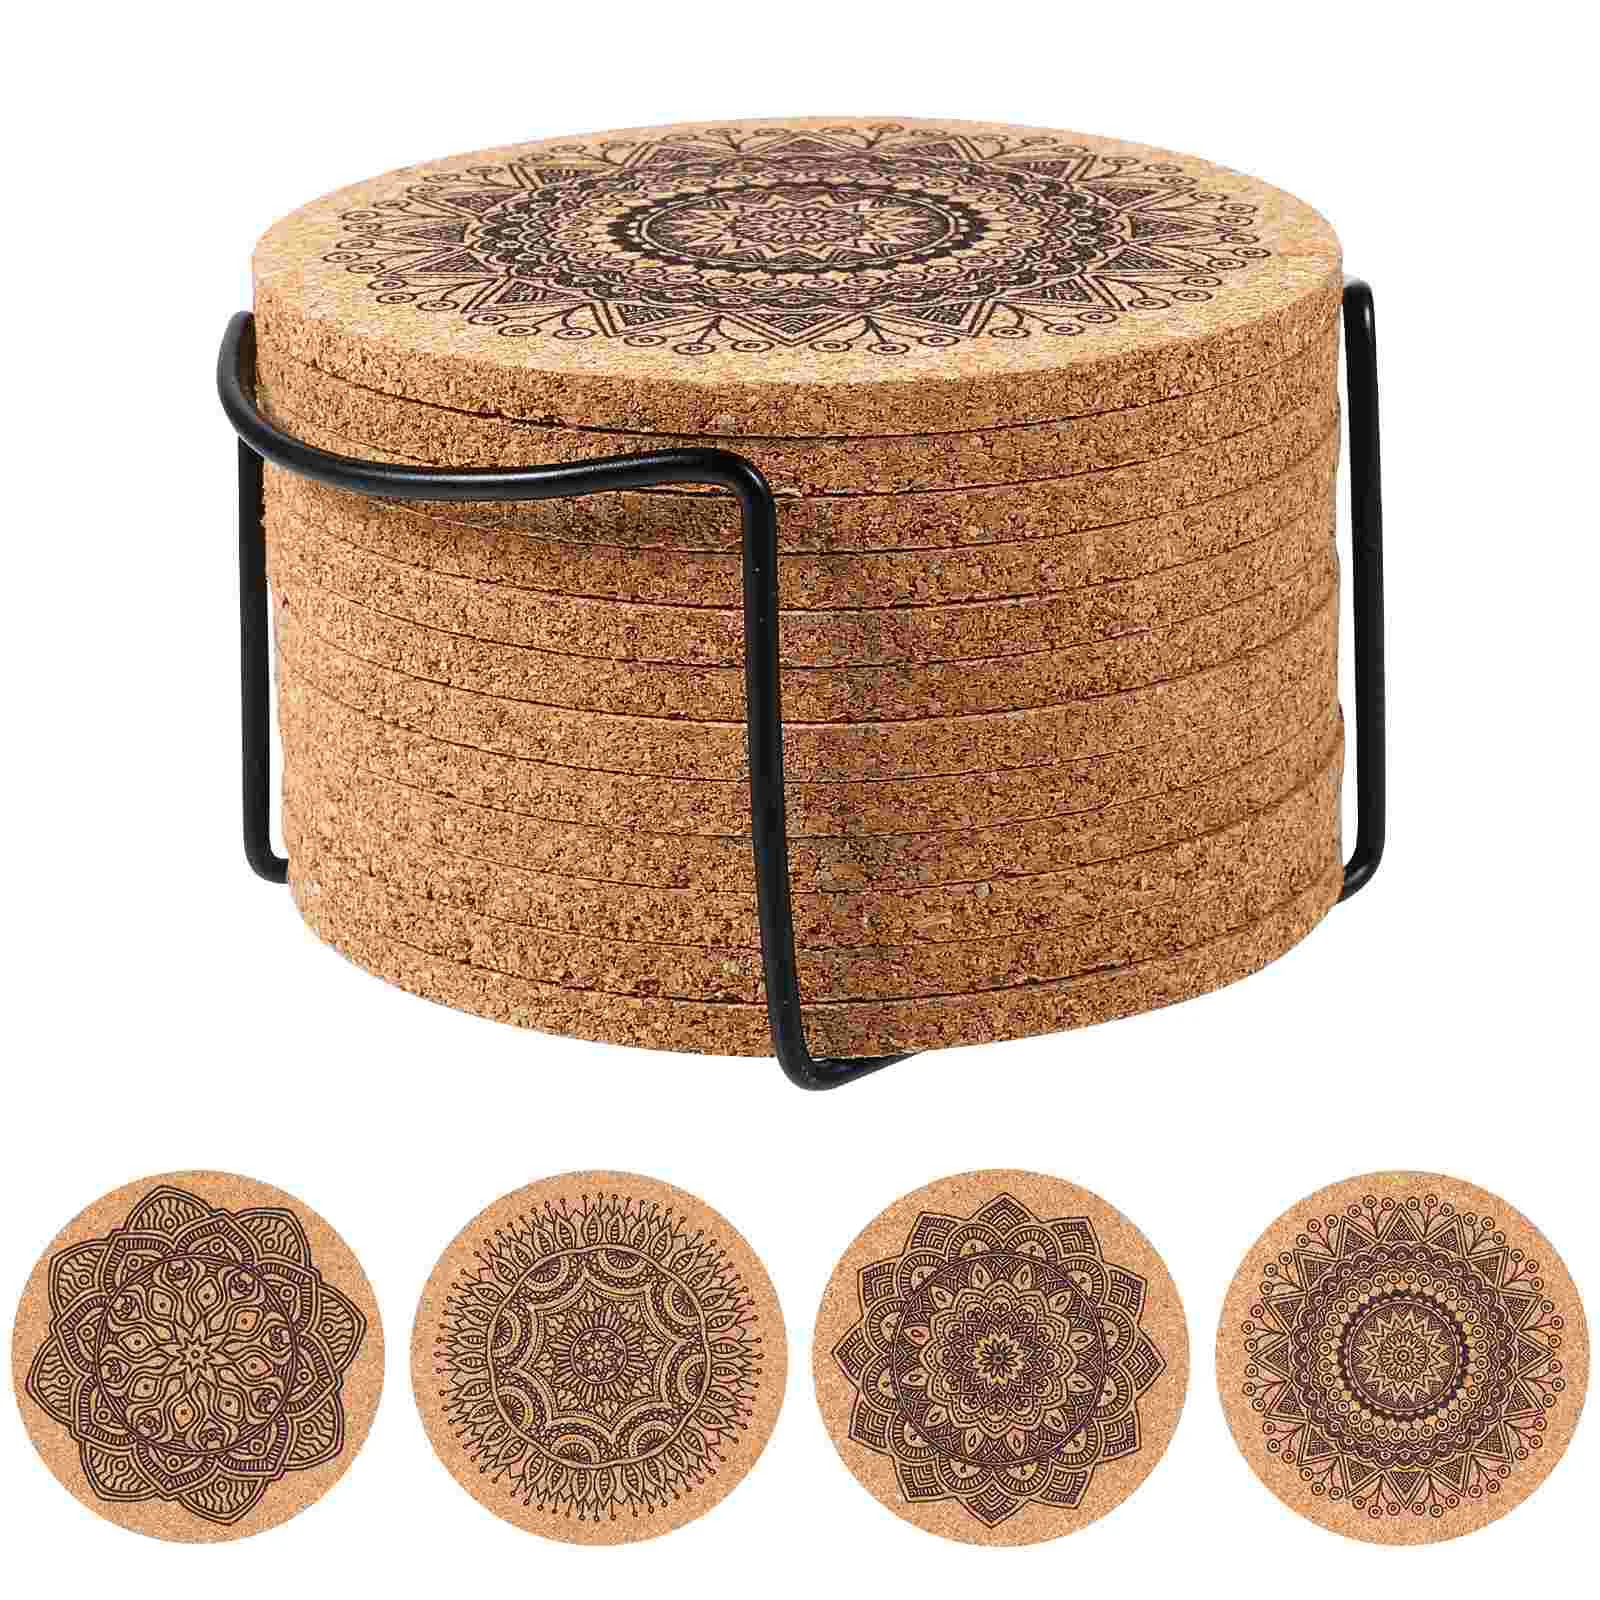 

Cork Coasters Drink Mats Dining Table Set Coasters Cork Base Cork Placemats Wood Coasters Outdoor Coaster Cup Holder Set